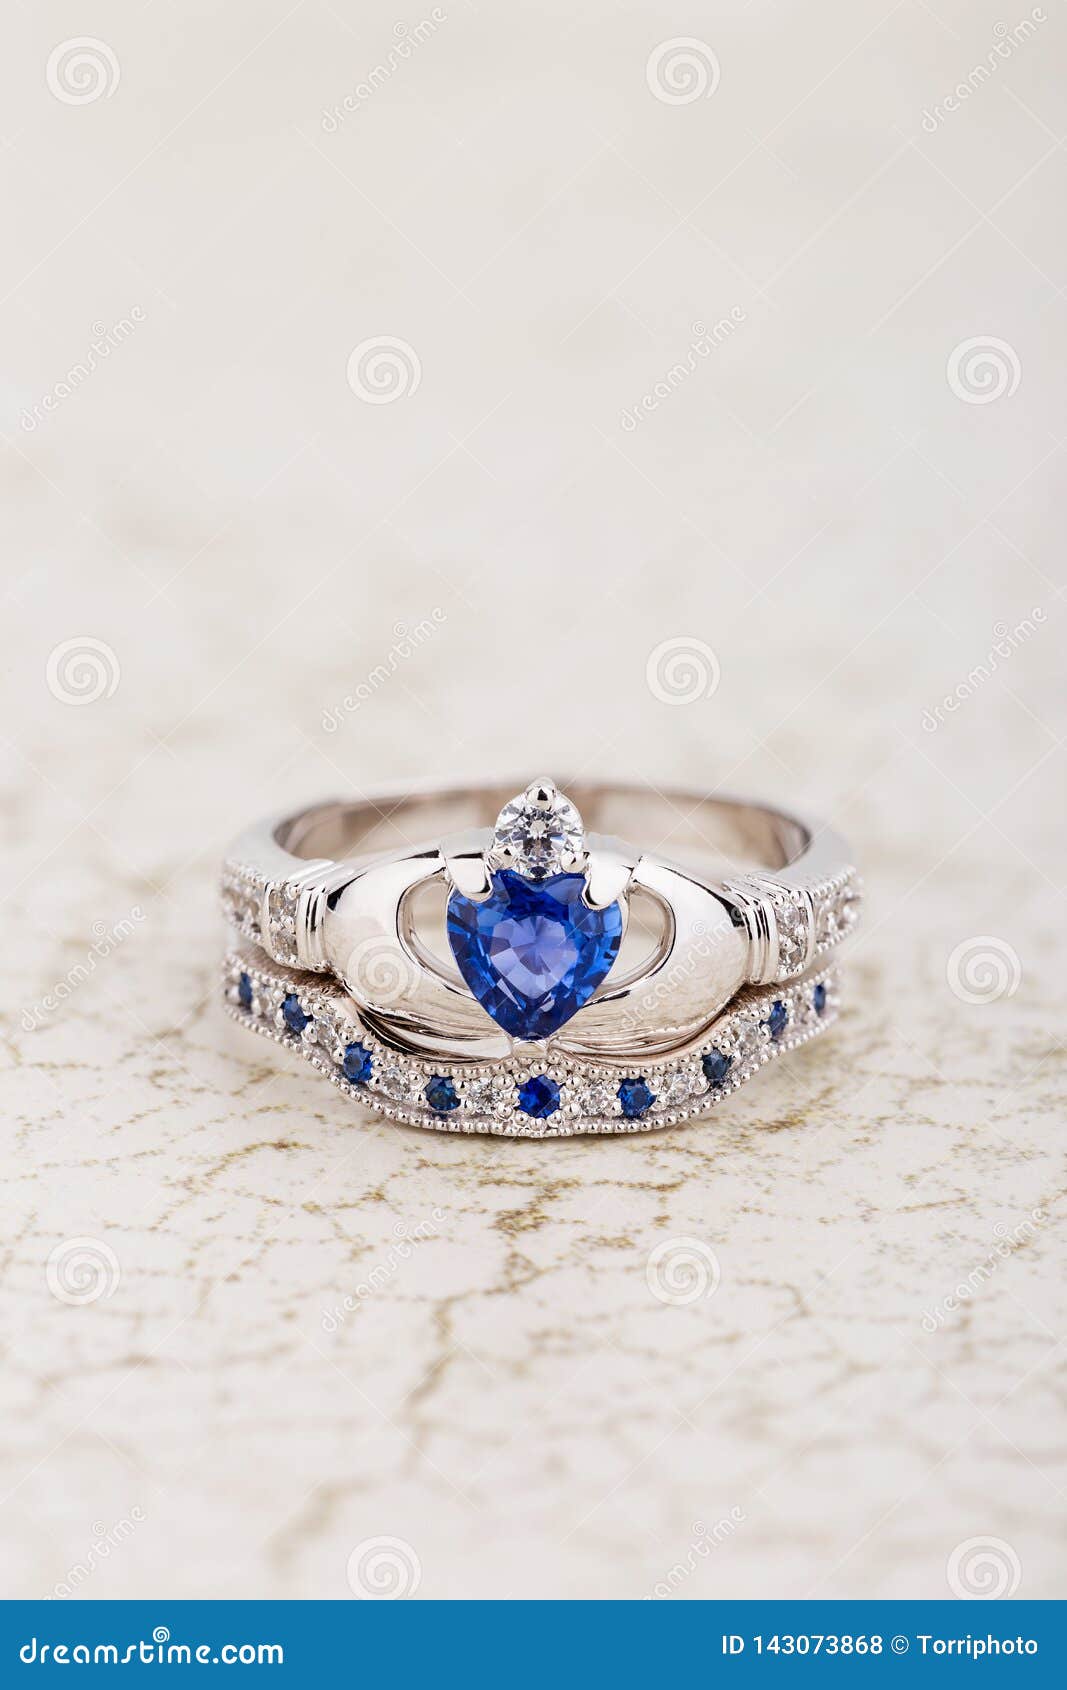 The Claddagh Ring: A Symbol Of Love & Unity- Perfect for Weddings